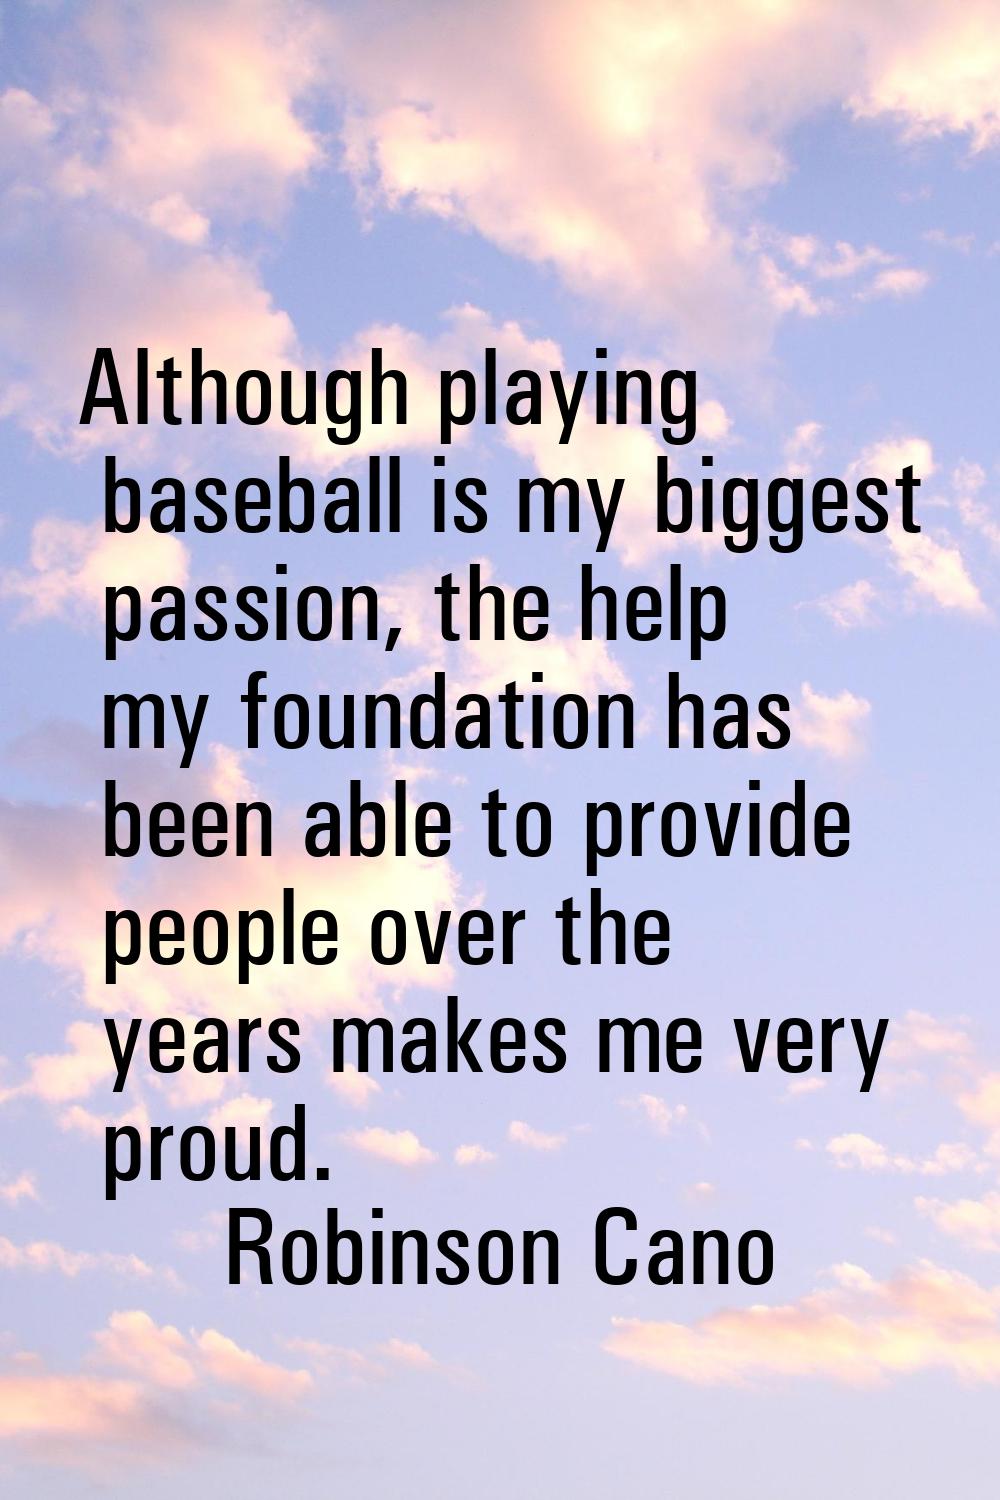 Although playing baseball is my biggest passion, the help my foundation has been able to provide pe